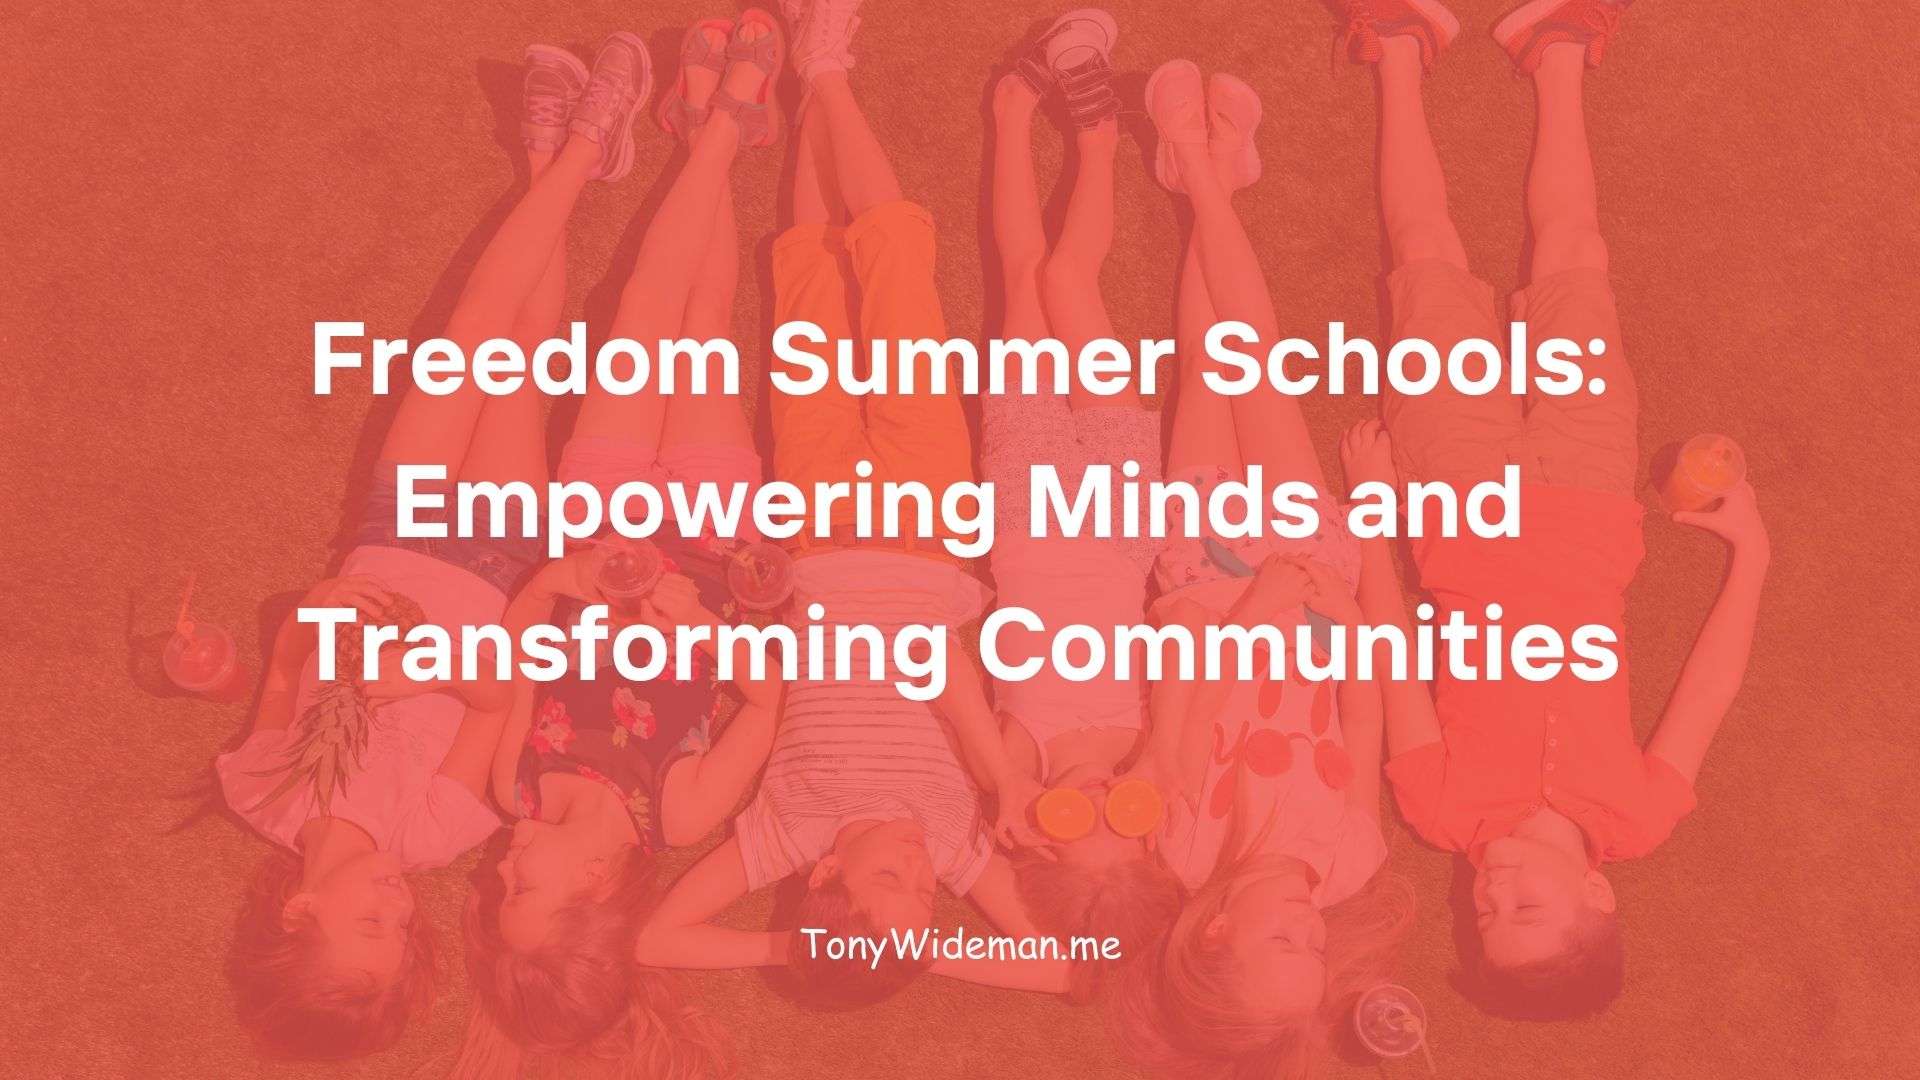 Freedom Summer Schools: Empowering Minds and Transforming Communities